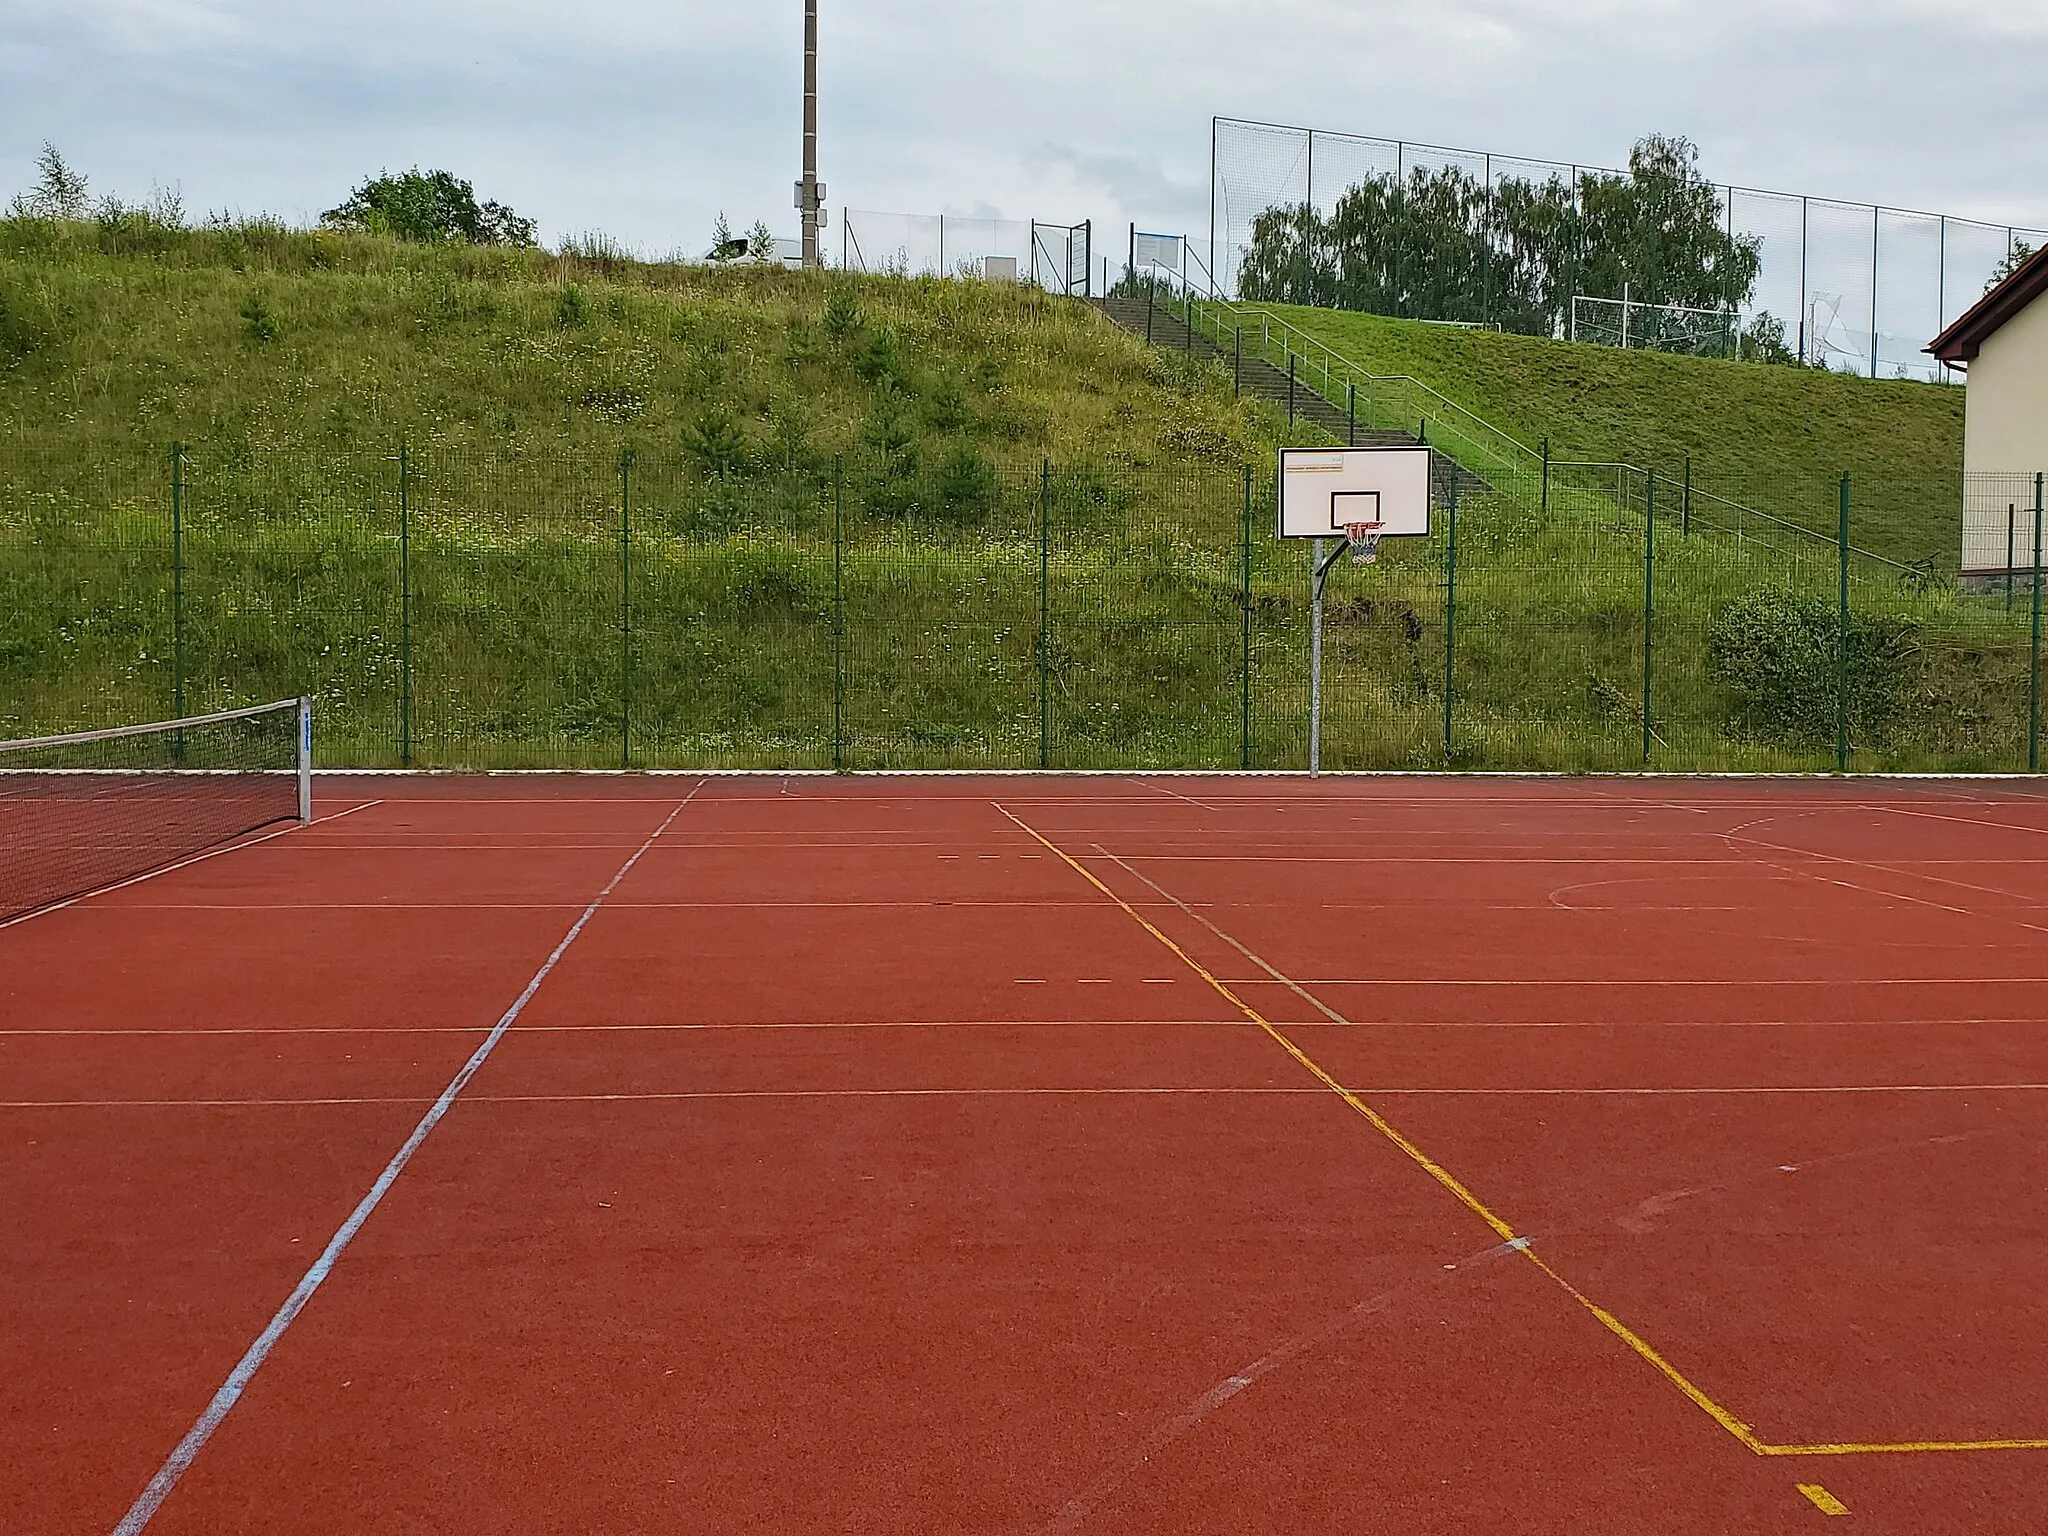 Photo showing: (BULK UPLOAD) Photographs of the playground, soccer field, and basketball court belonging to Jan Pawel 2 Elementary School in Gowidlino, Poland. All taken on 2023-08-05.